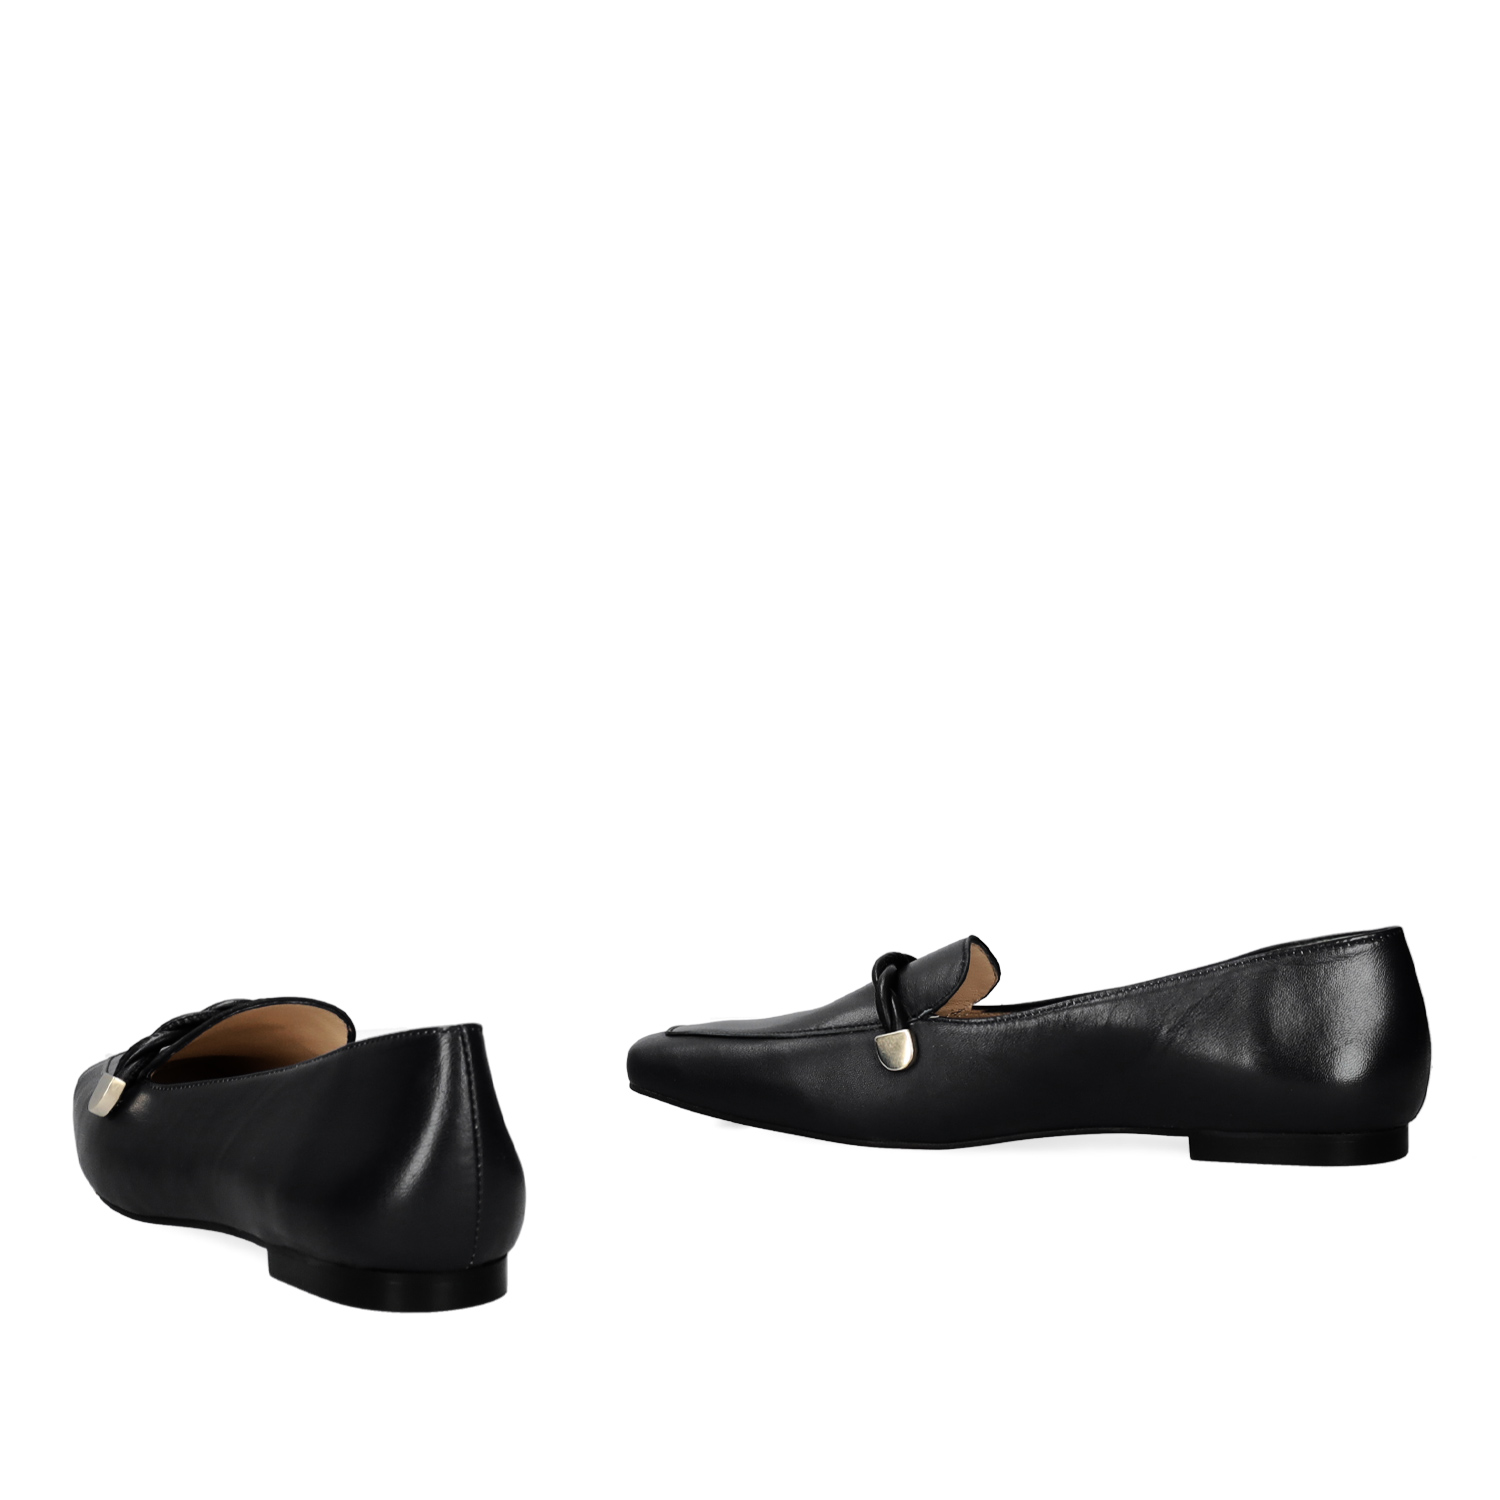 Black leather loafers 